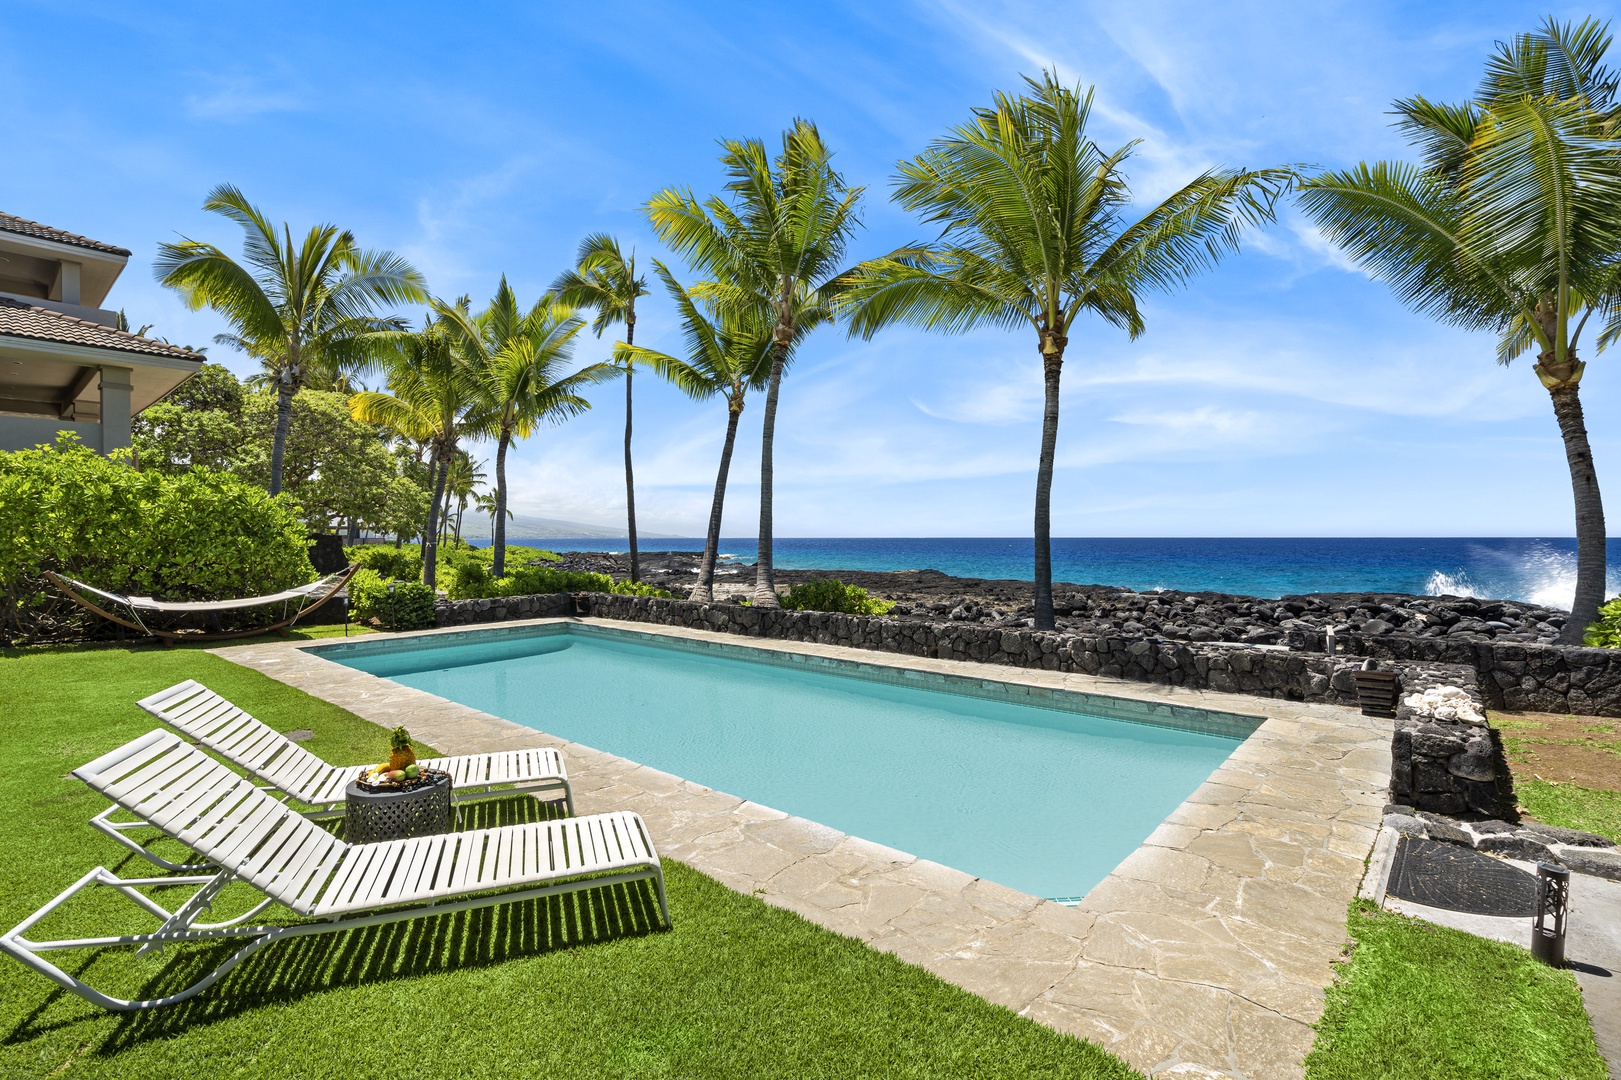 Kailua Kona Vacation Rentals, Kona Blue - Large lap pool perfect for activities or exercise